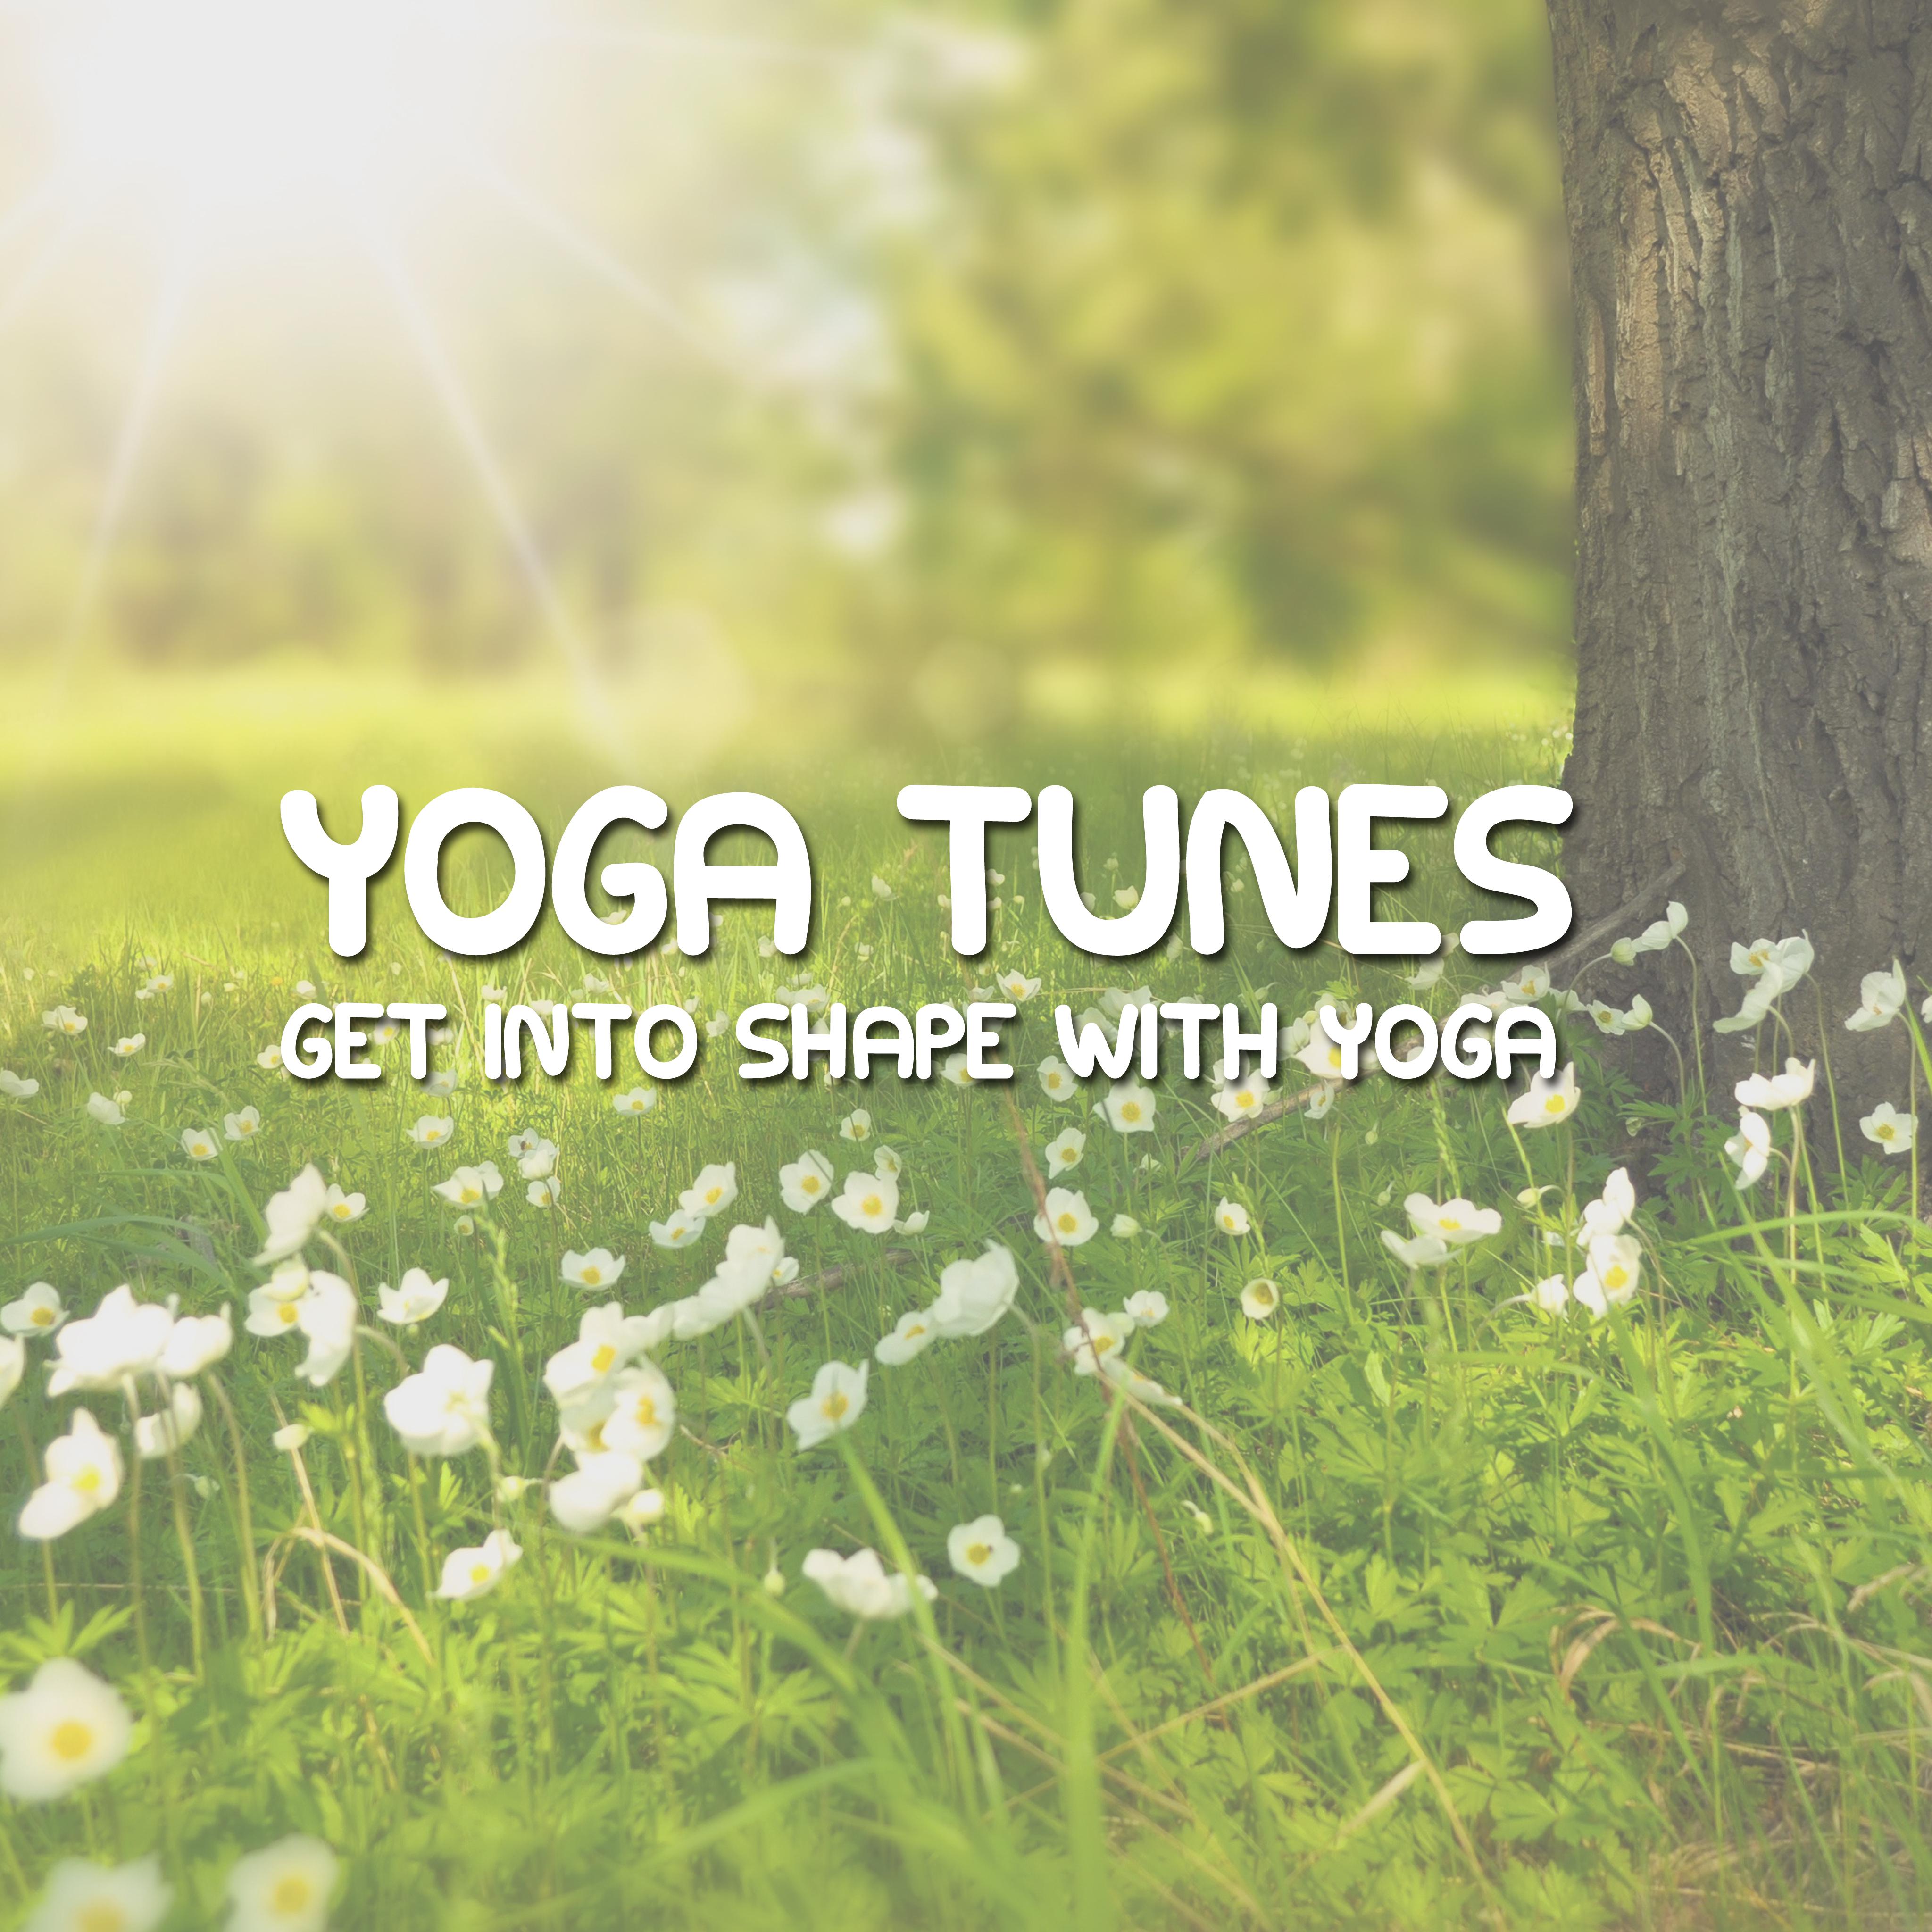 15 Yoga Tunes - Get Into Shape with Yoga